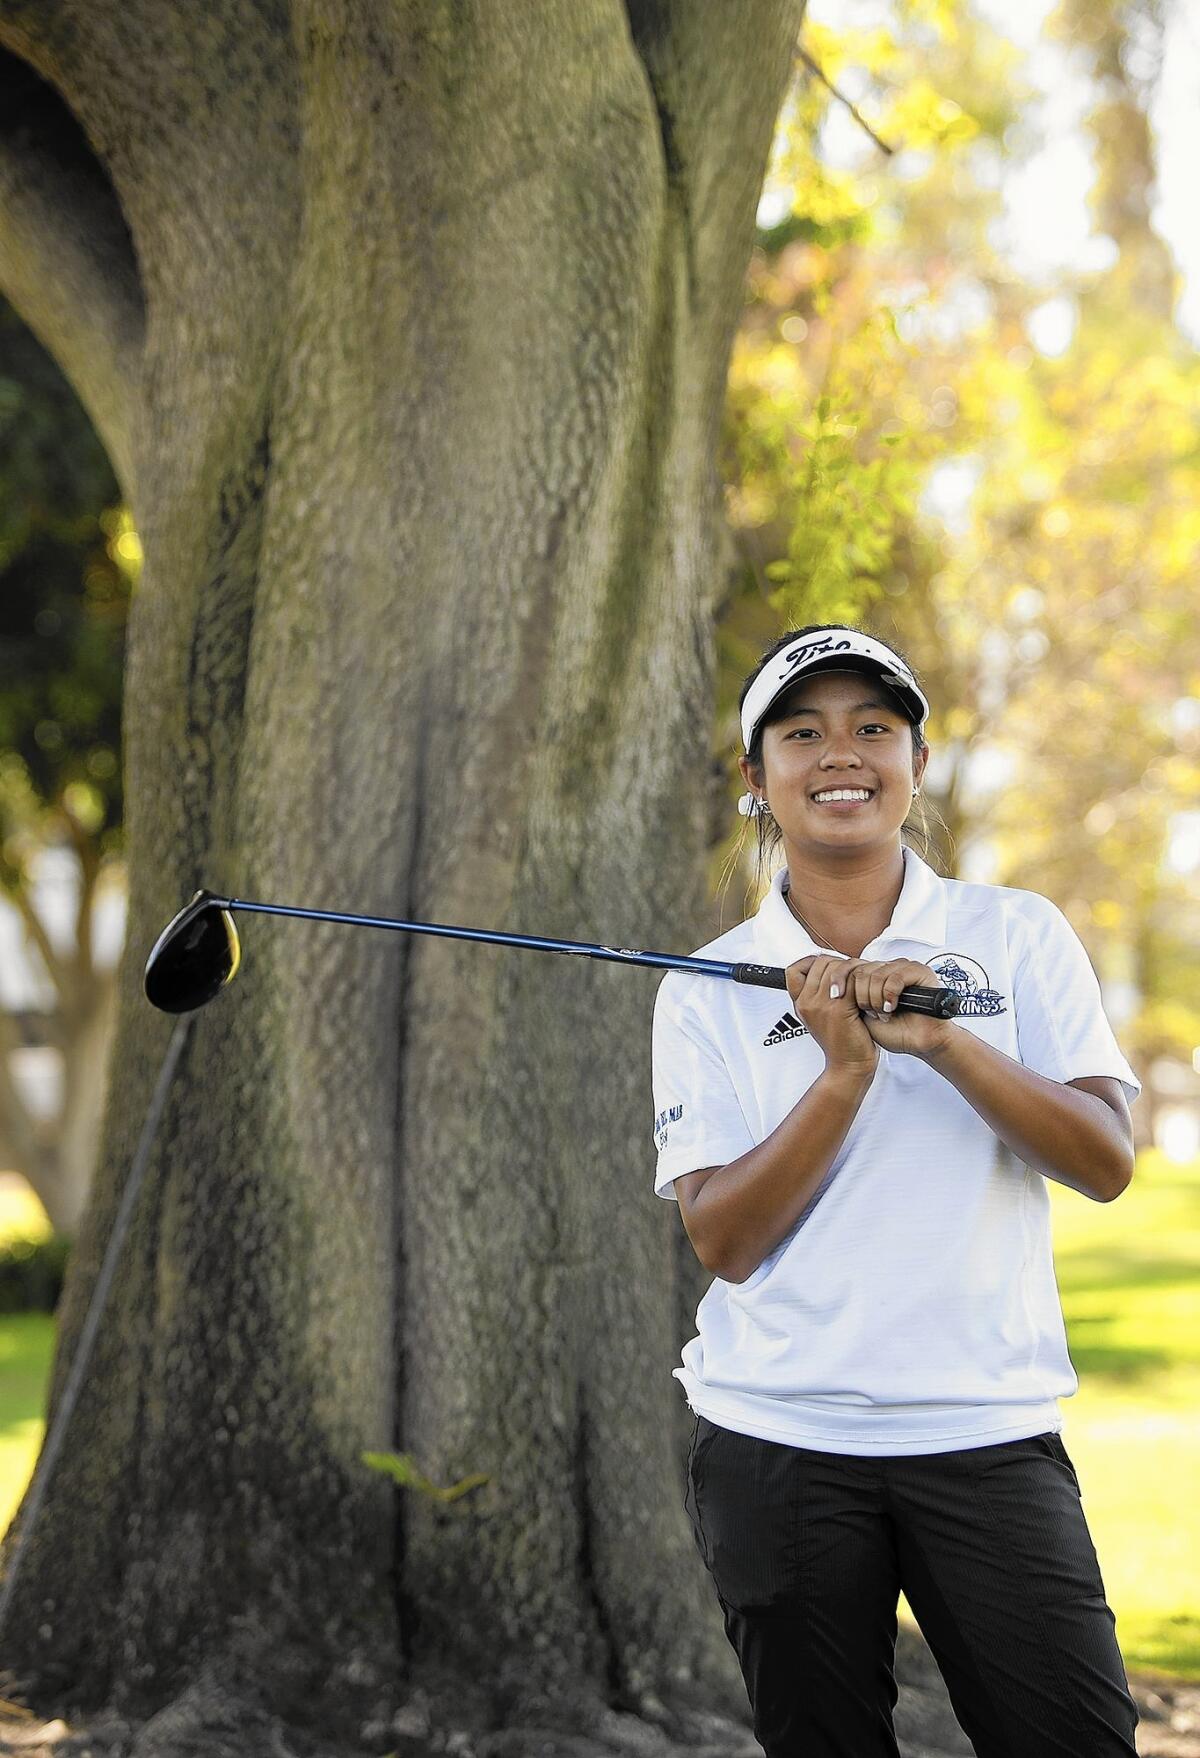 Corona del Mar High junior golfer Alyaa Abdulghany captured the CIF State Championship with a two-under-par 69, a women's course record at Poppy Hills on Tuesday.